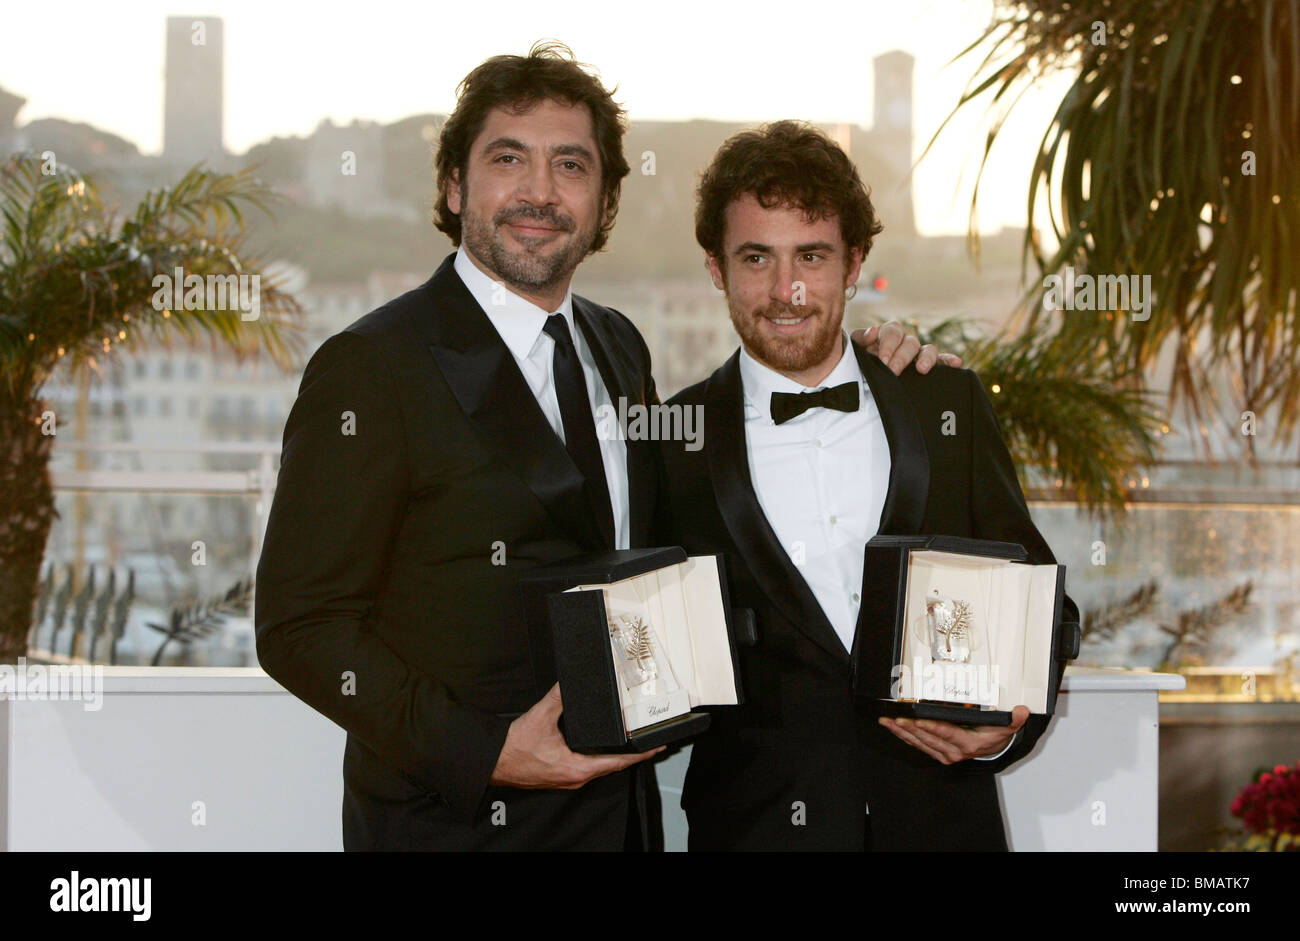 JAVIER BARDEM & ELIO GERMANO WINNERS PHOTOCALL PALAIS DES FESTIVALS CANNES FRANCE 23 May 2010 Stock Photo